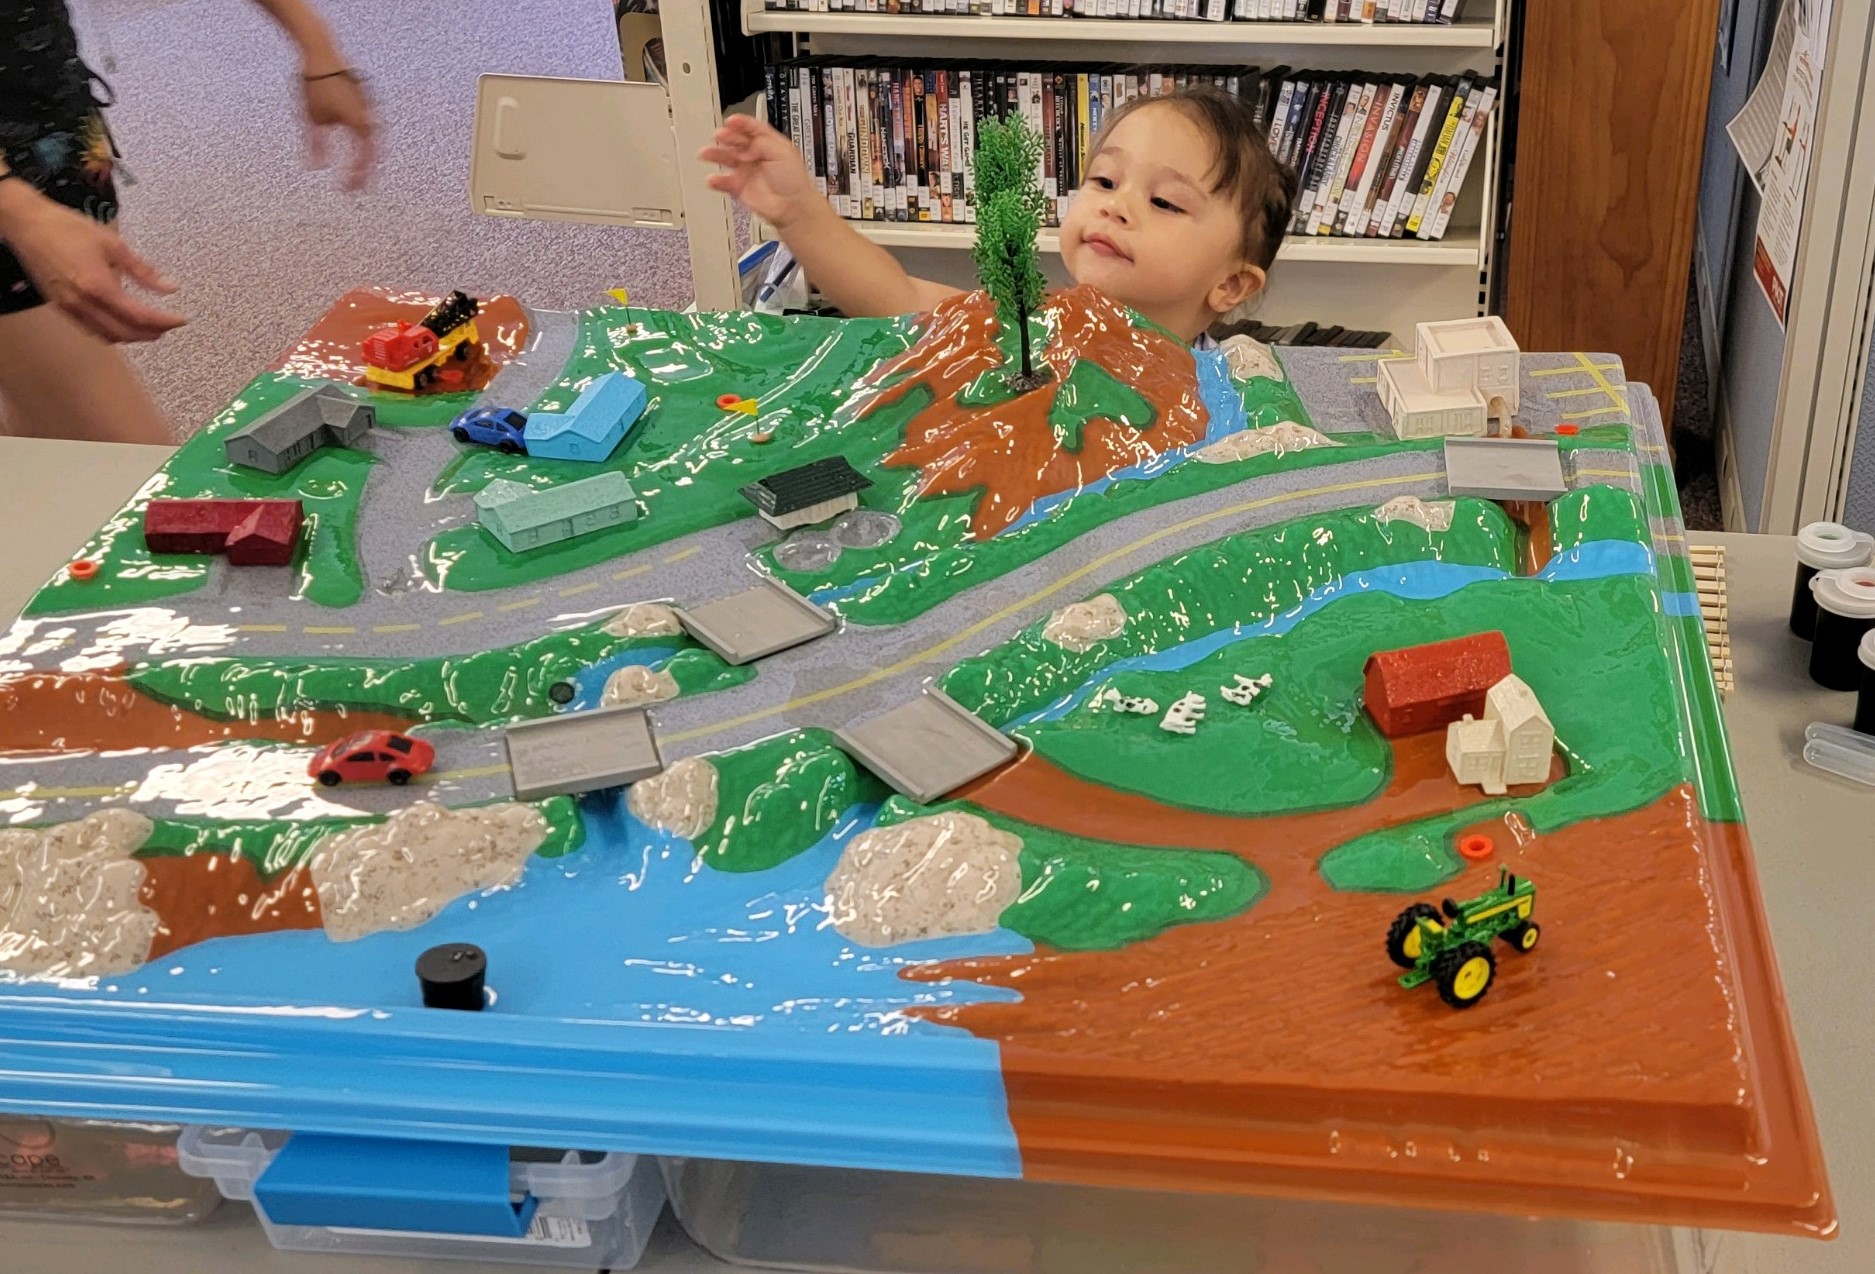 A child reaches for the Enviroscape watershed model